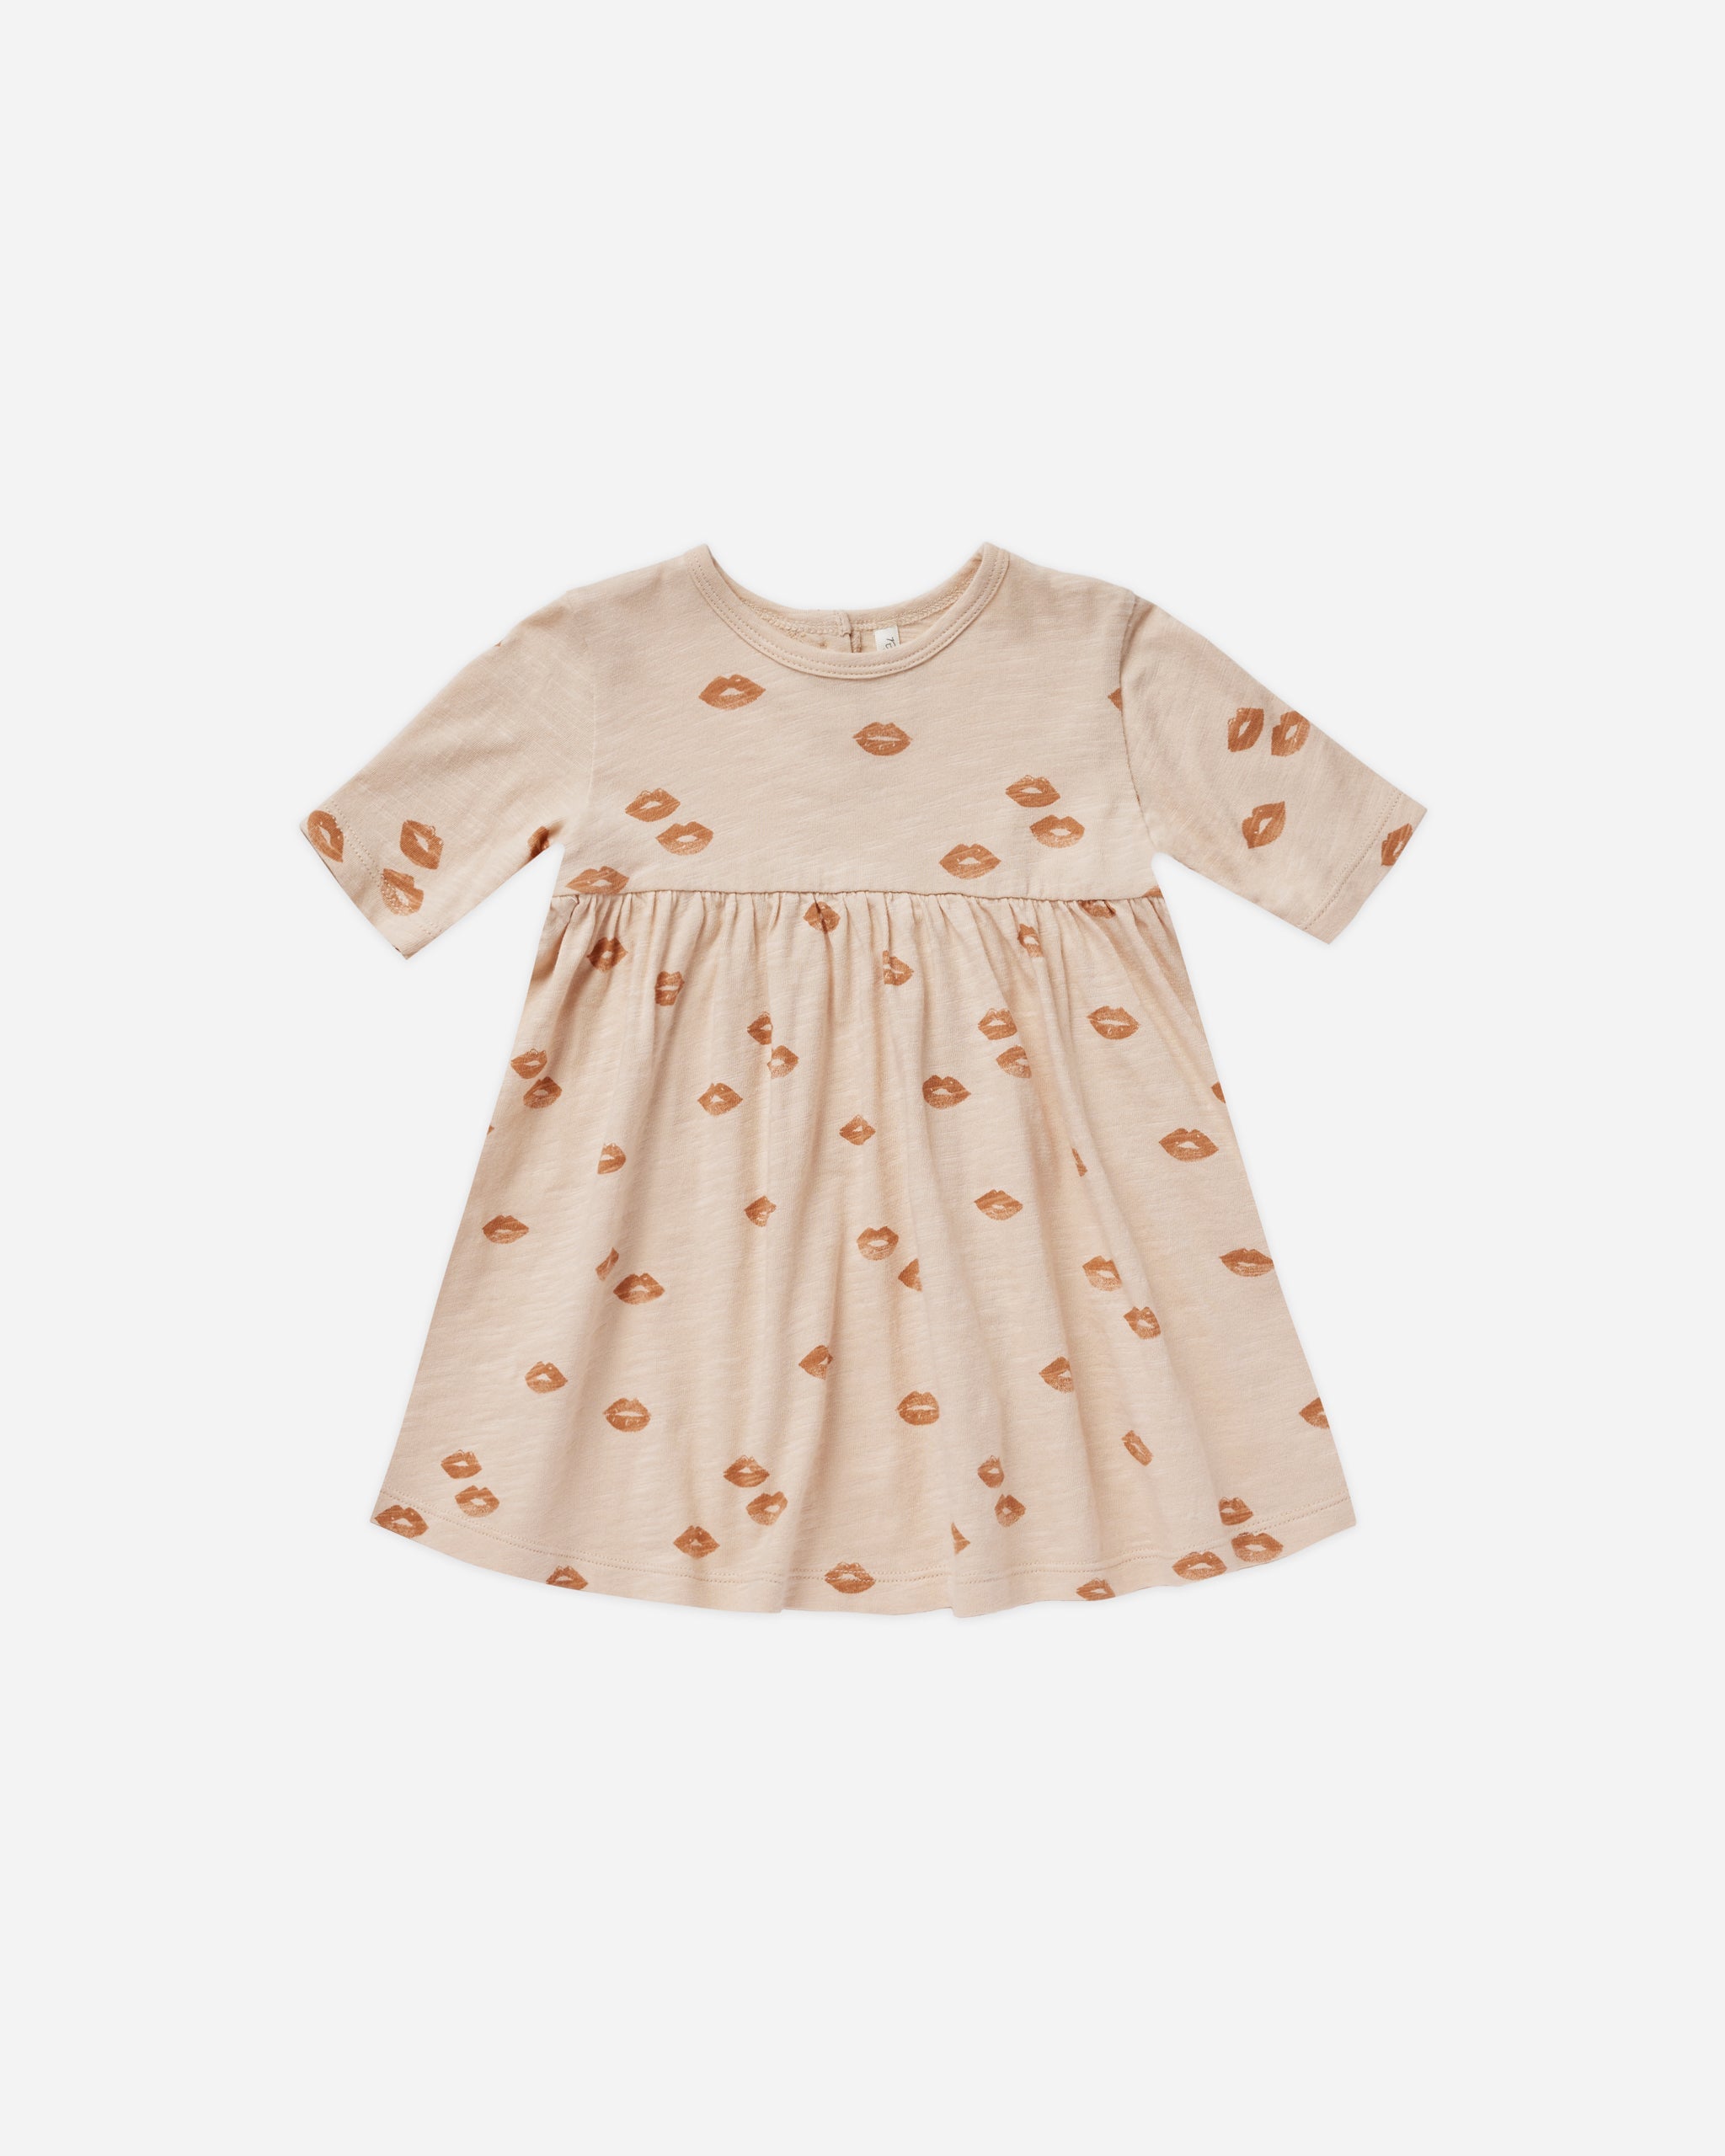 Finn Dress || Lips - Rylee + Cru | Kids Clothes | Trendy Baby Clothes | Modern Infant Outfits |